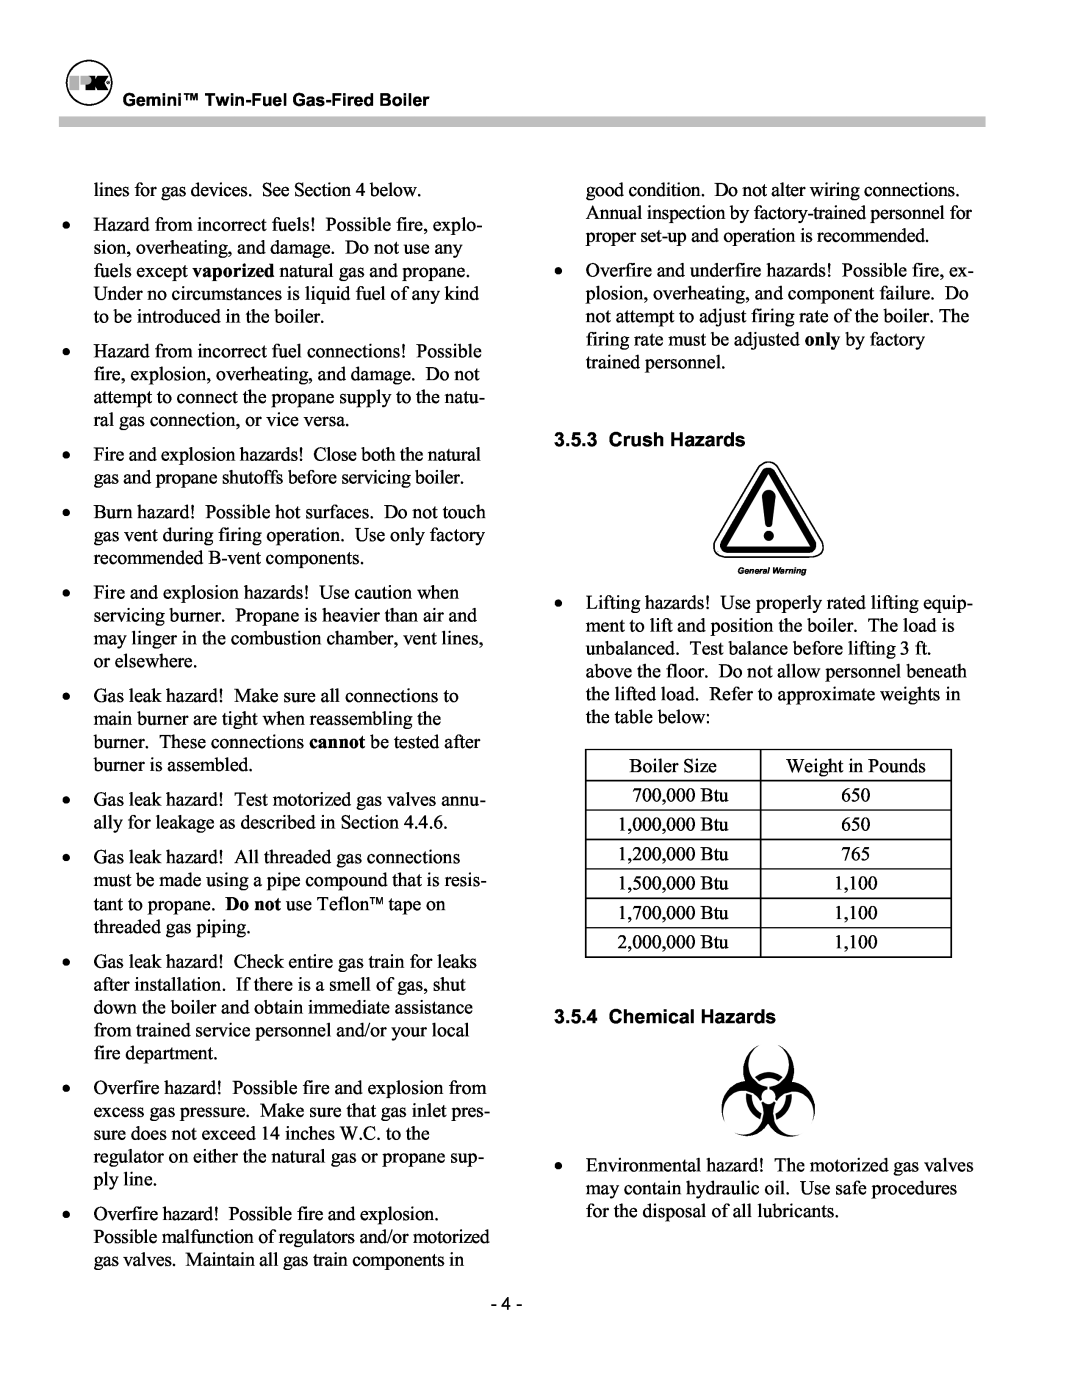 Patterson-Kelley TBIG-03 owner manual Crush Hazards, Chemical Hazards 